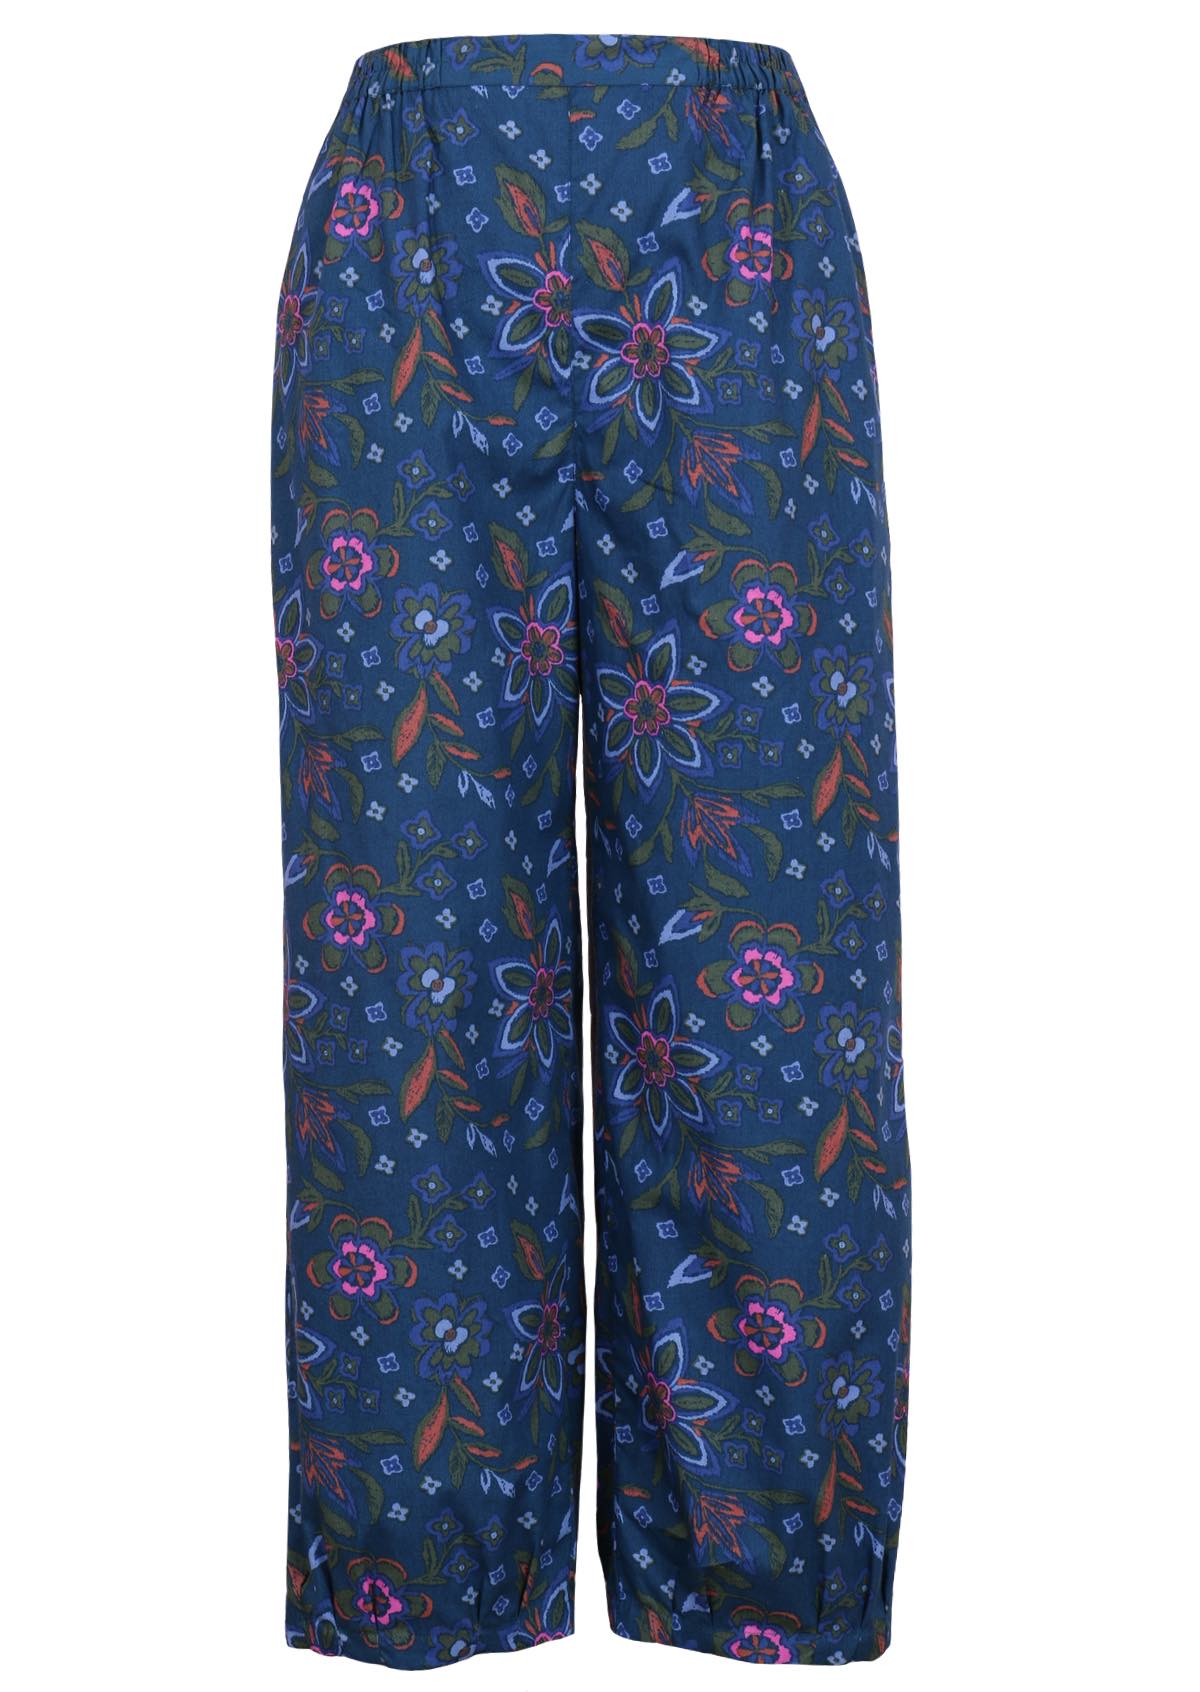 Floral cotton pants with a blue base have pleats at the ankles. 